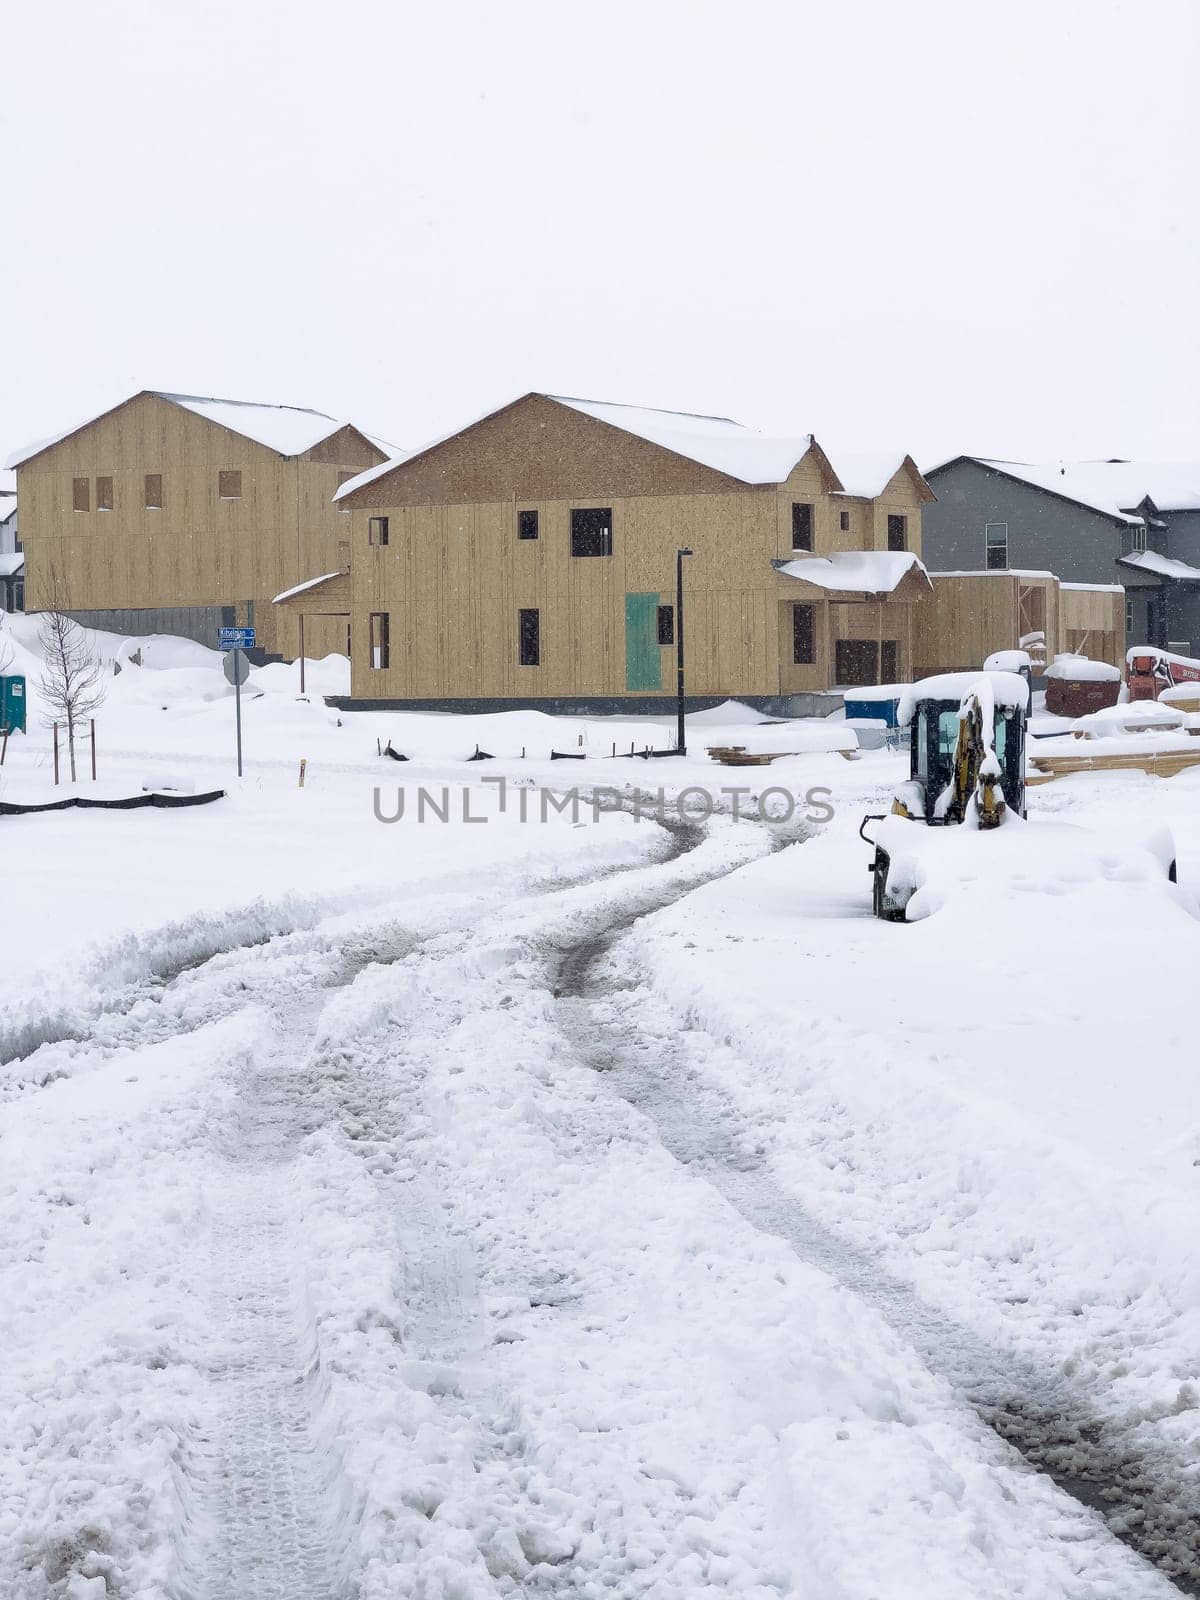 Castle Rock, Colorado, USA-March 16, 2024-Fresh snowfall gently covers a new suburban neighborhood under construction, where the emerging structures await completion, nestled in a wintery setting.